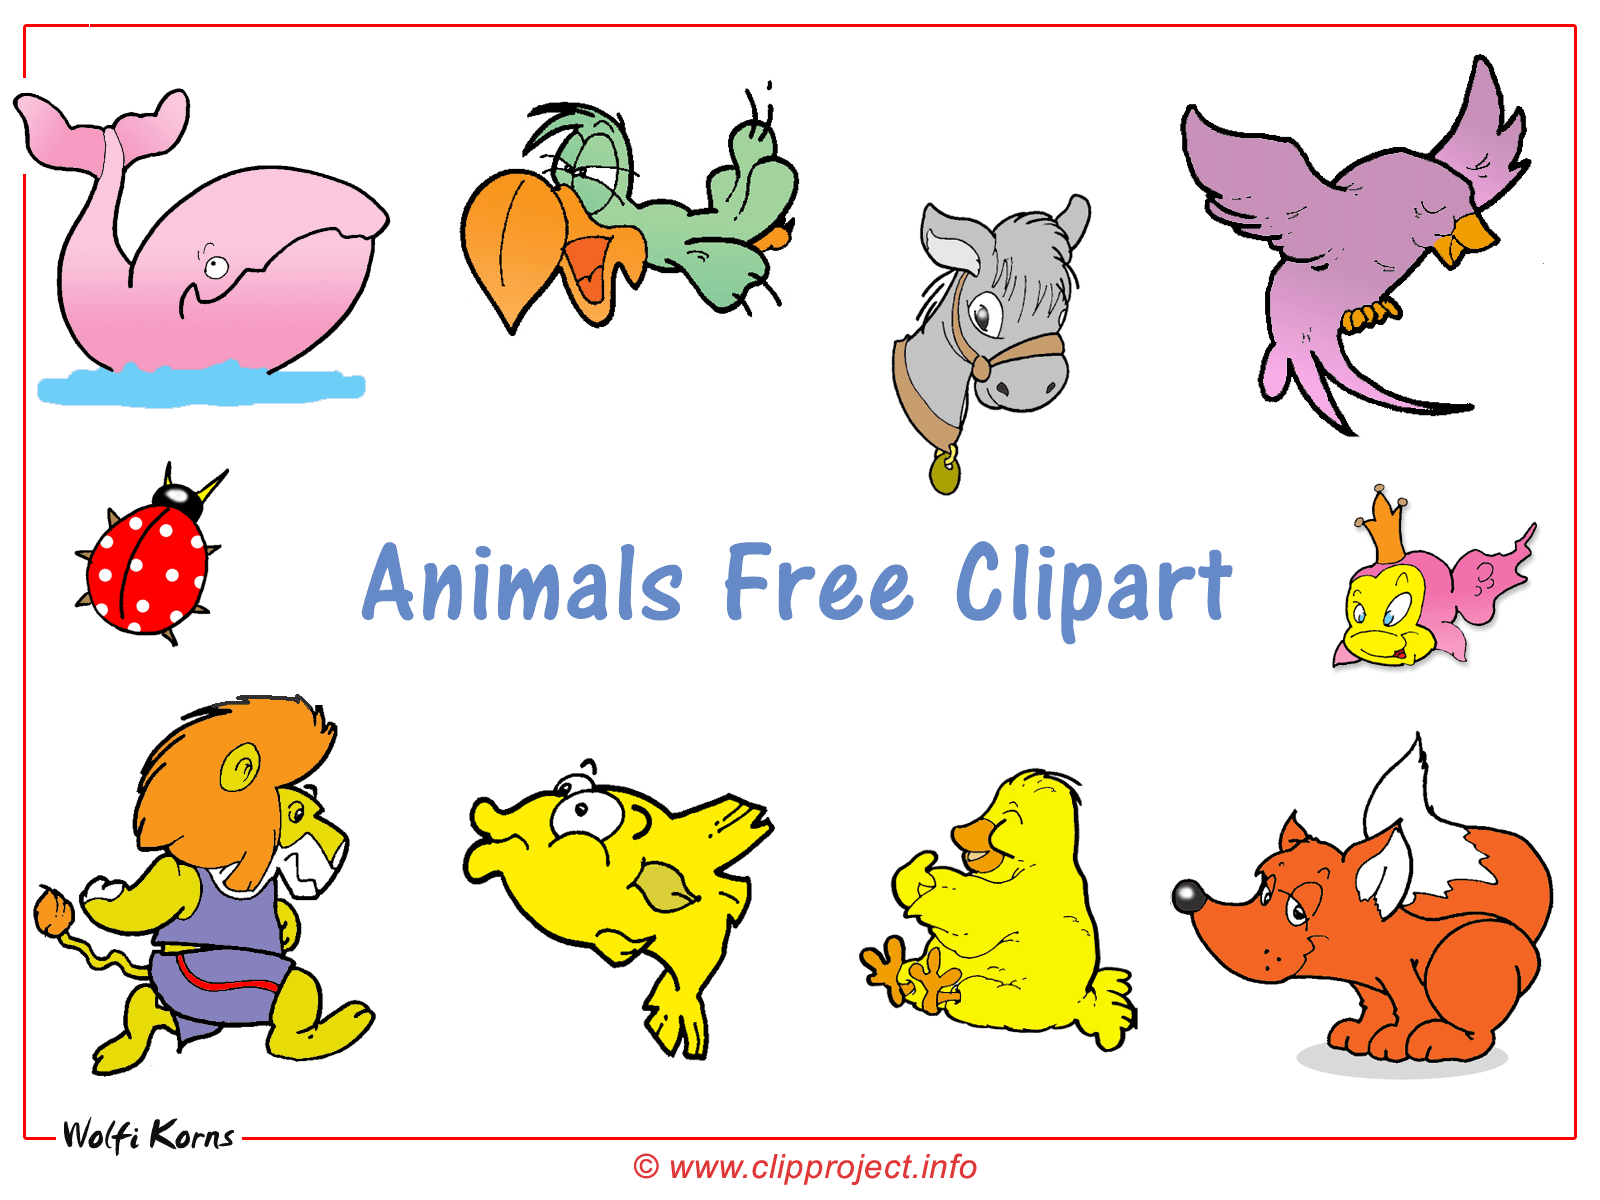 Clipart free download images - Clip Art Free Images